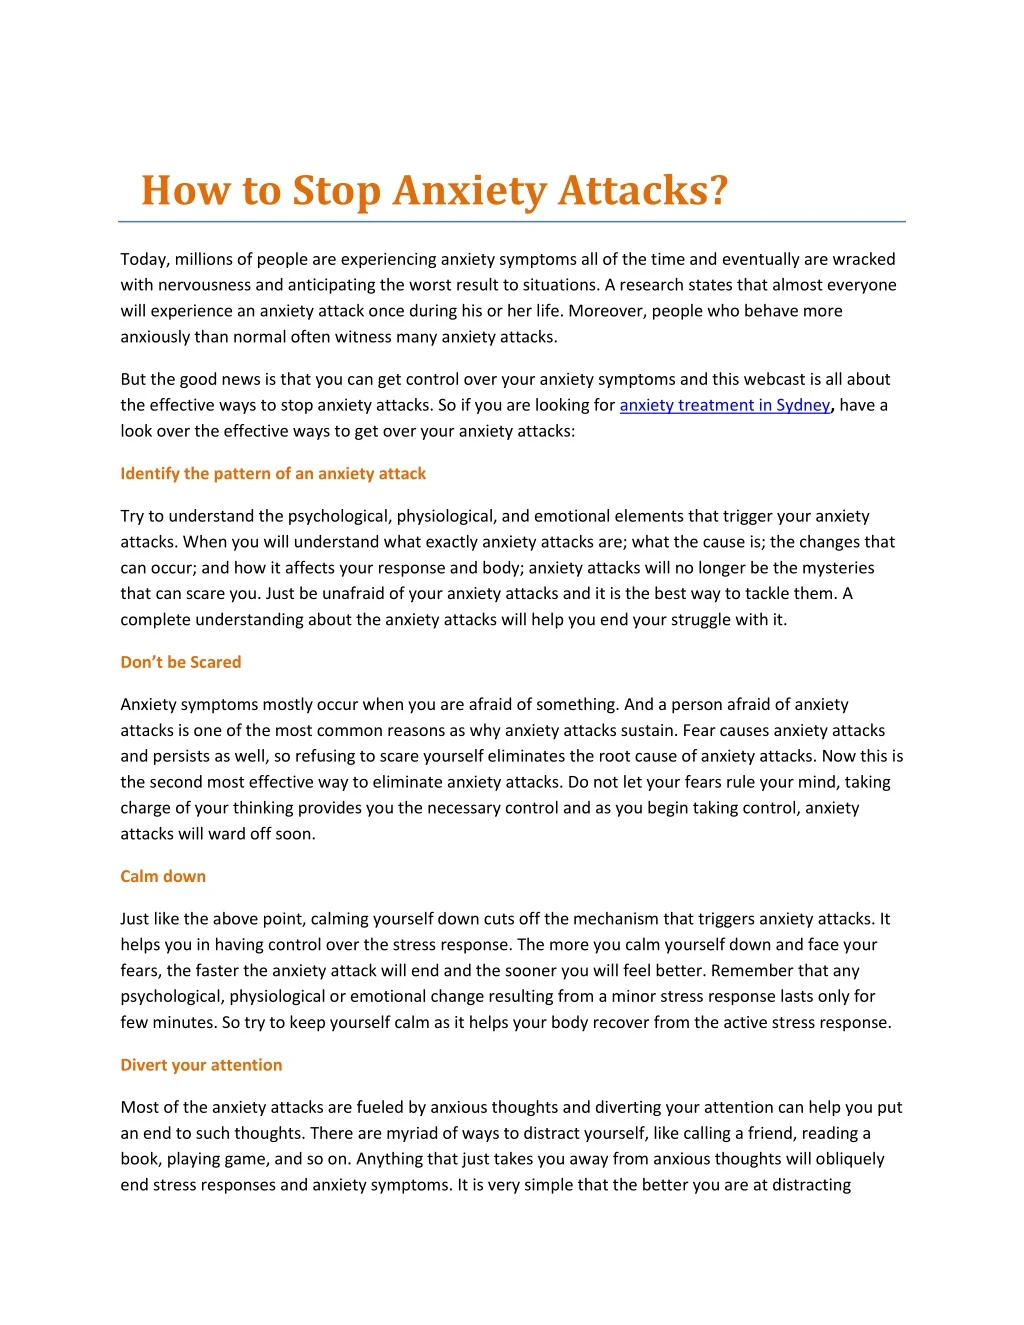 how to stop anxiety attacks